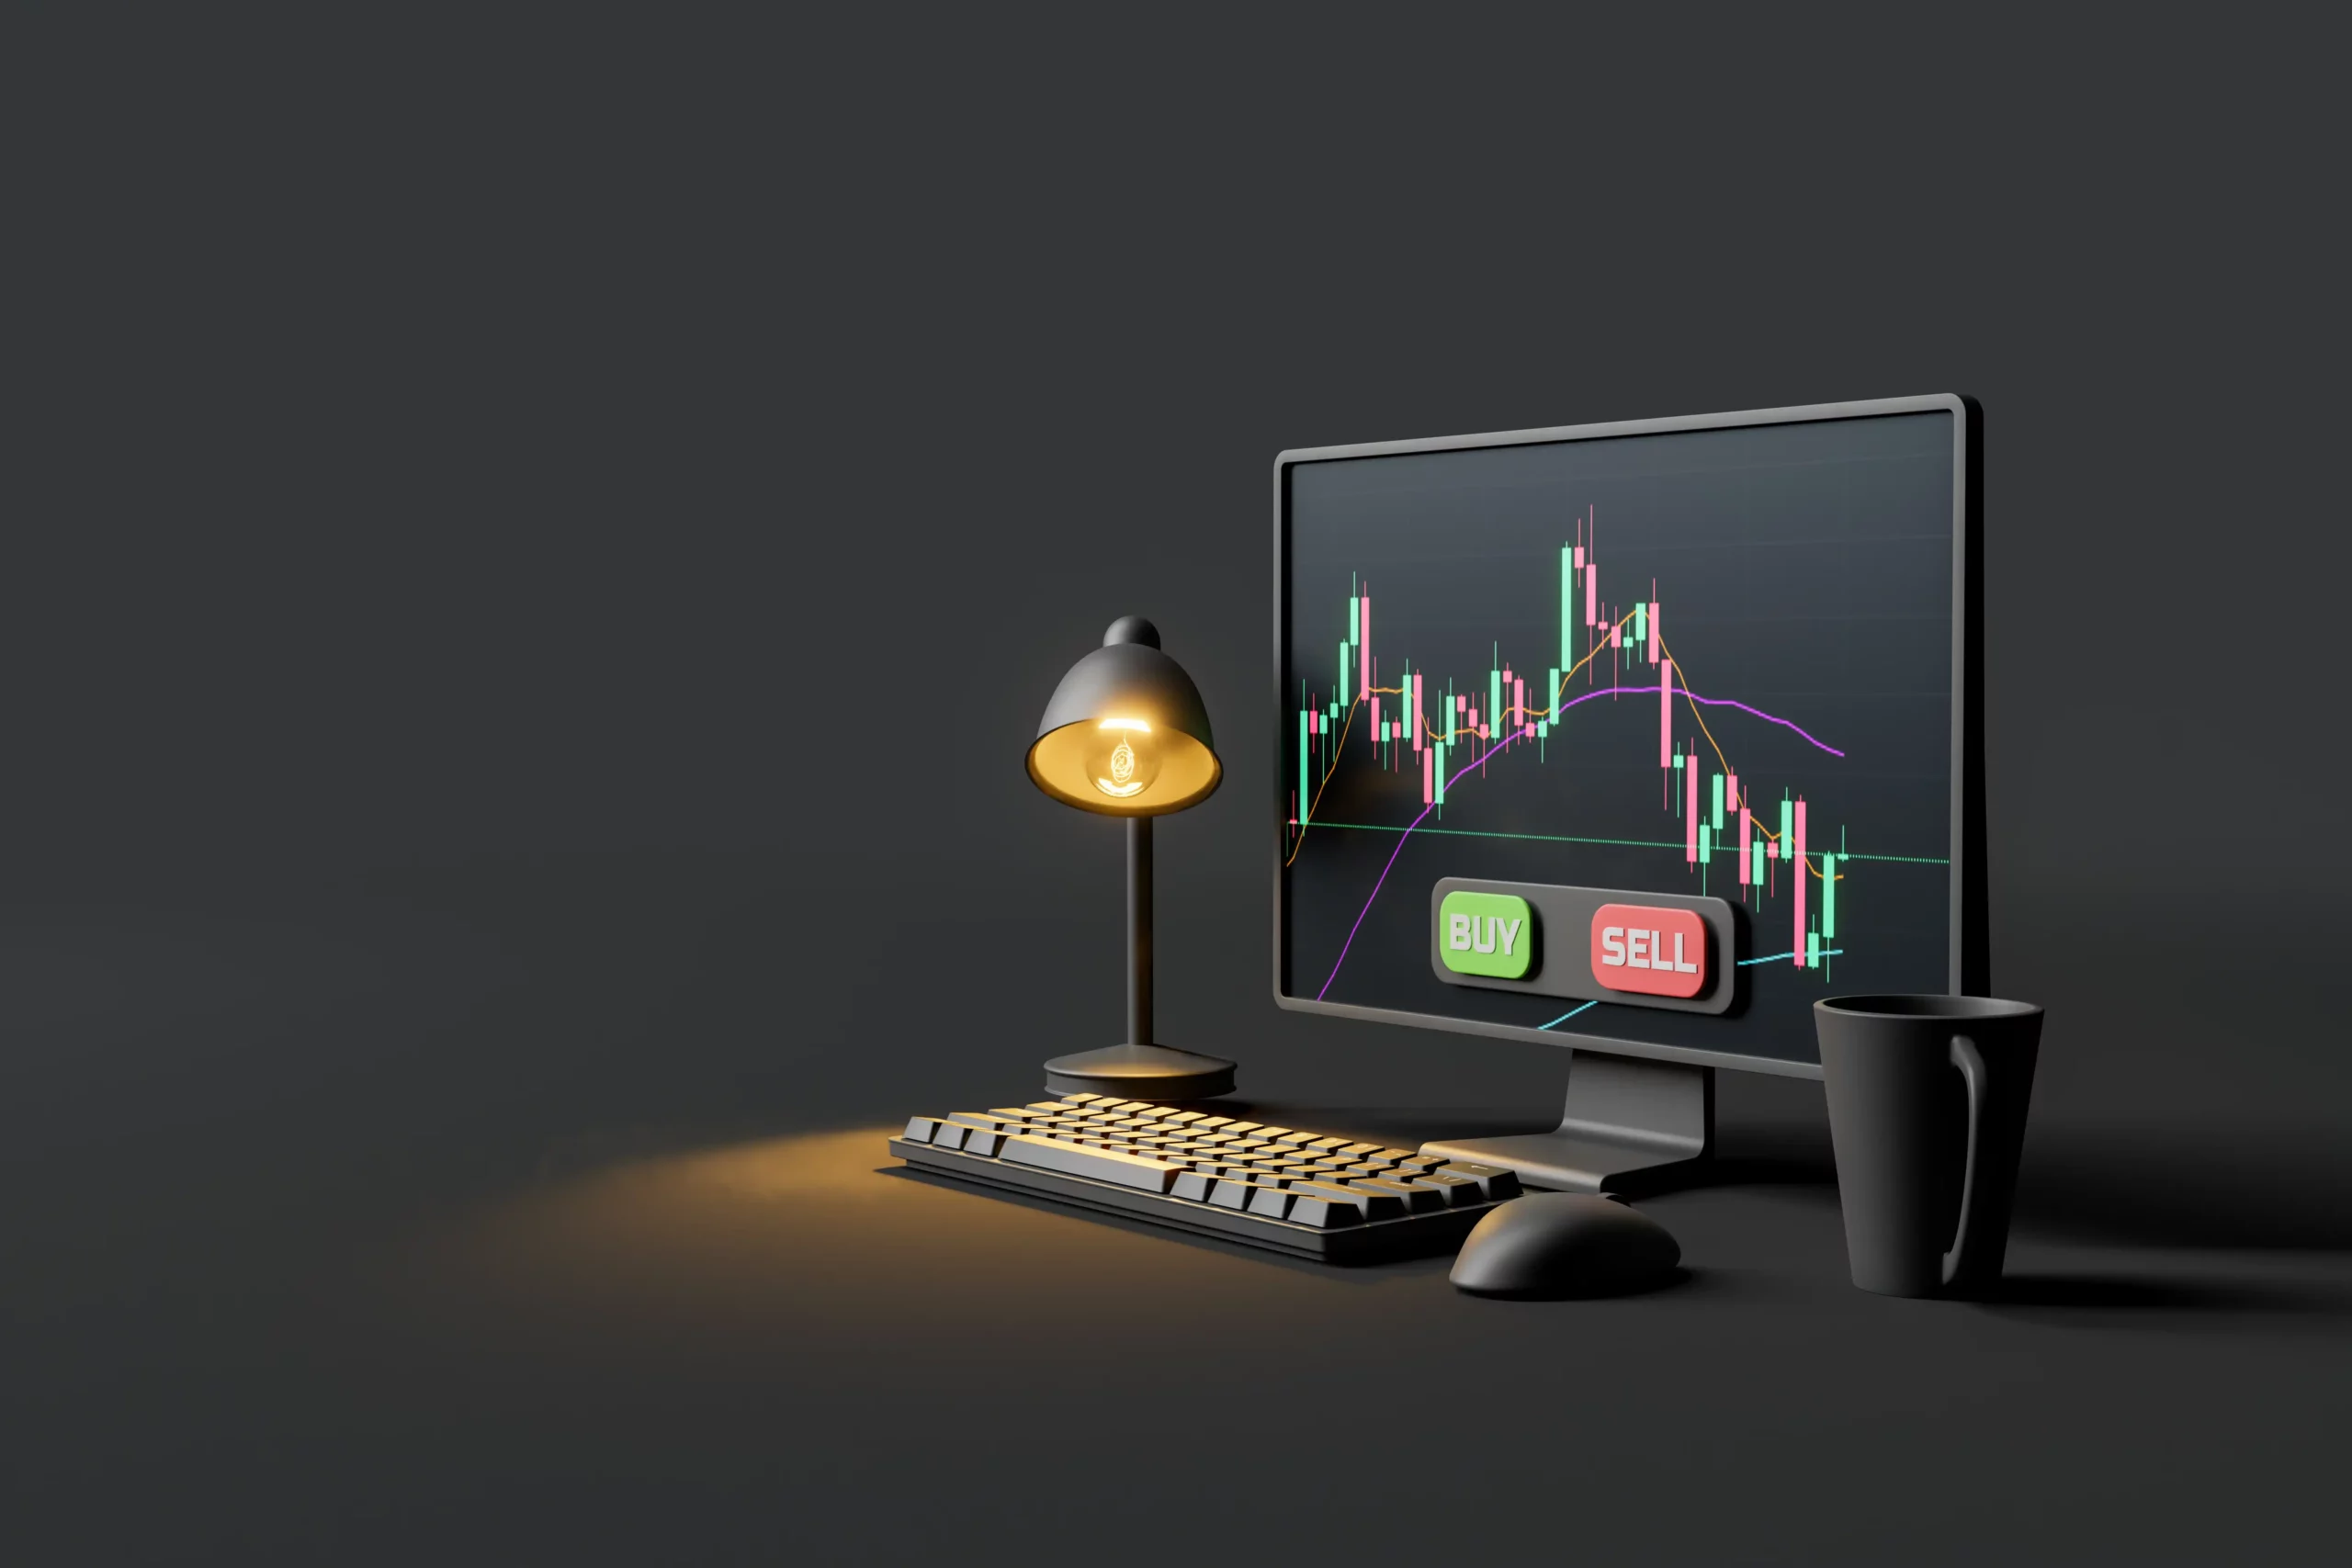 Does the time of the day affect your trading performance?